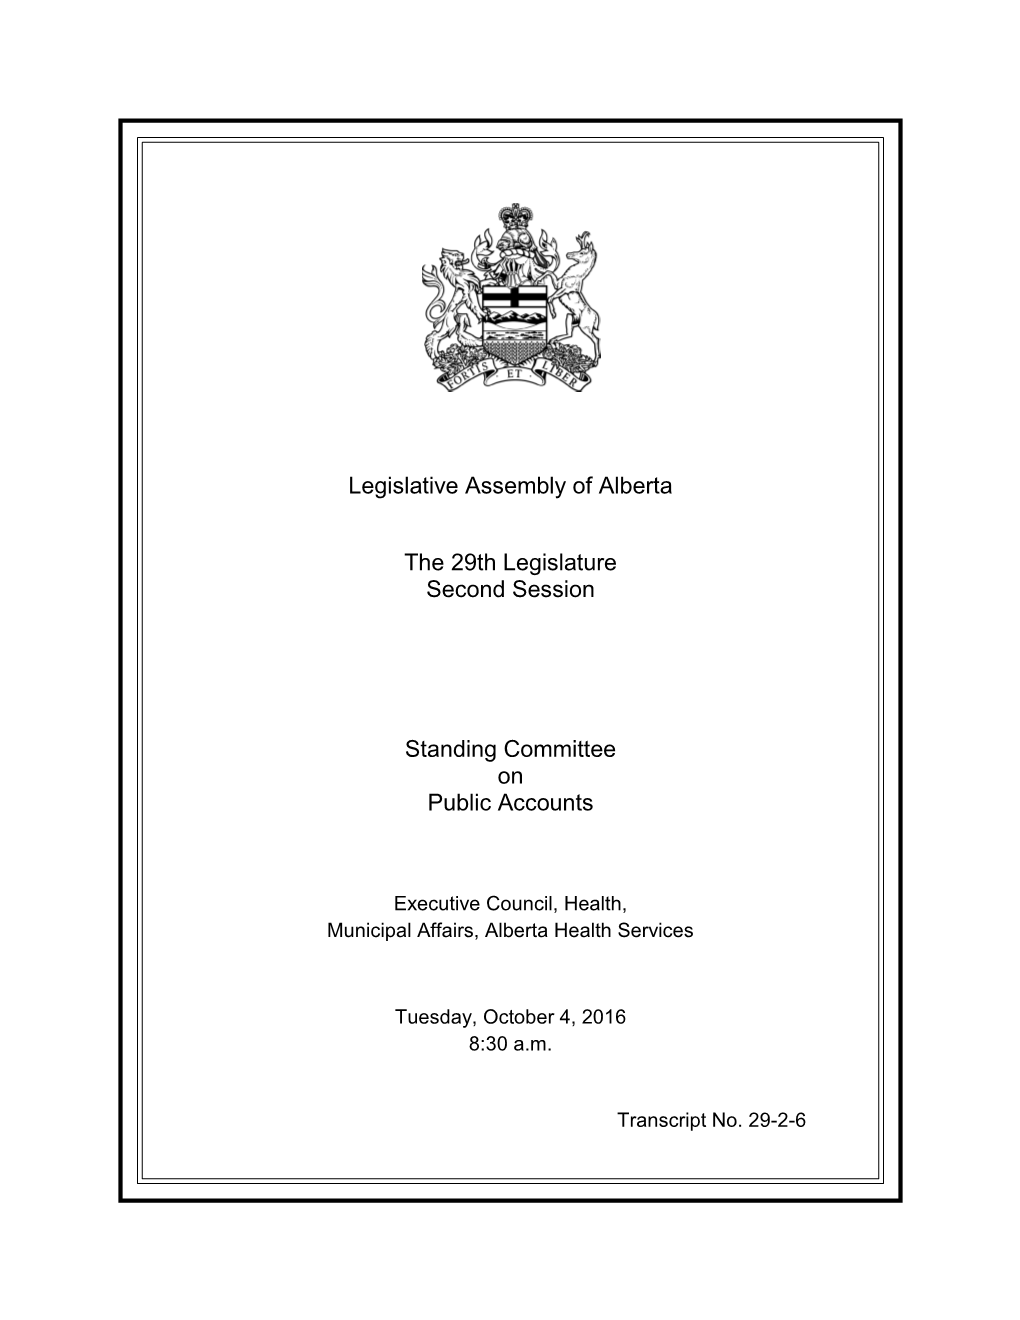 Legislative Assembly of Alberta the 29Th Legislature Second Session Standing Committee on Public Accounts